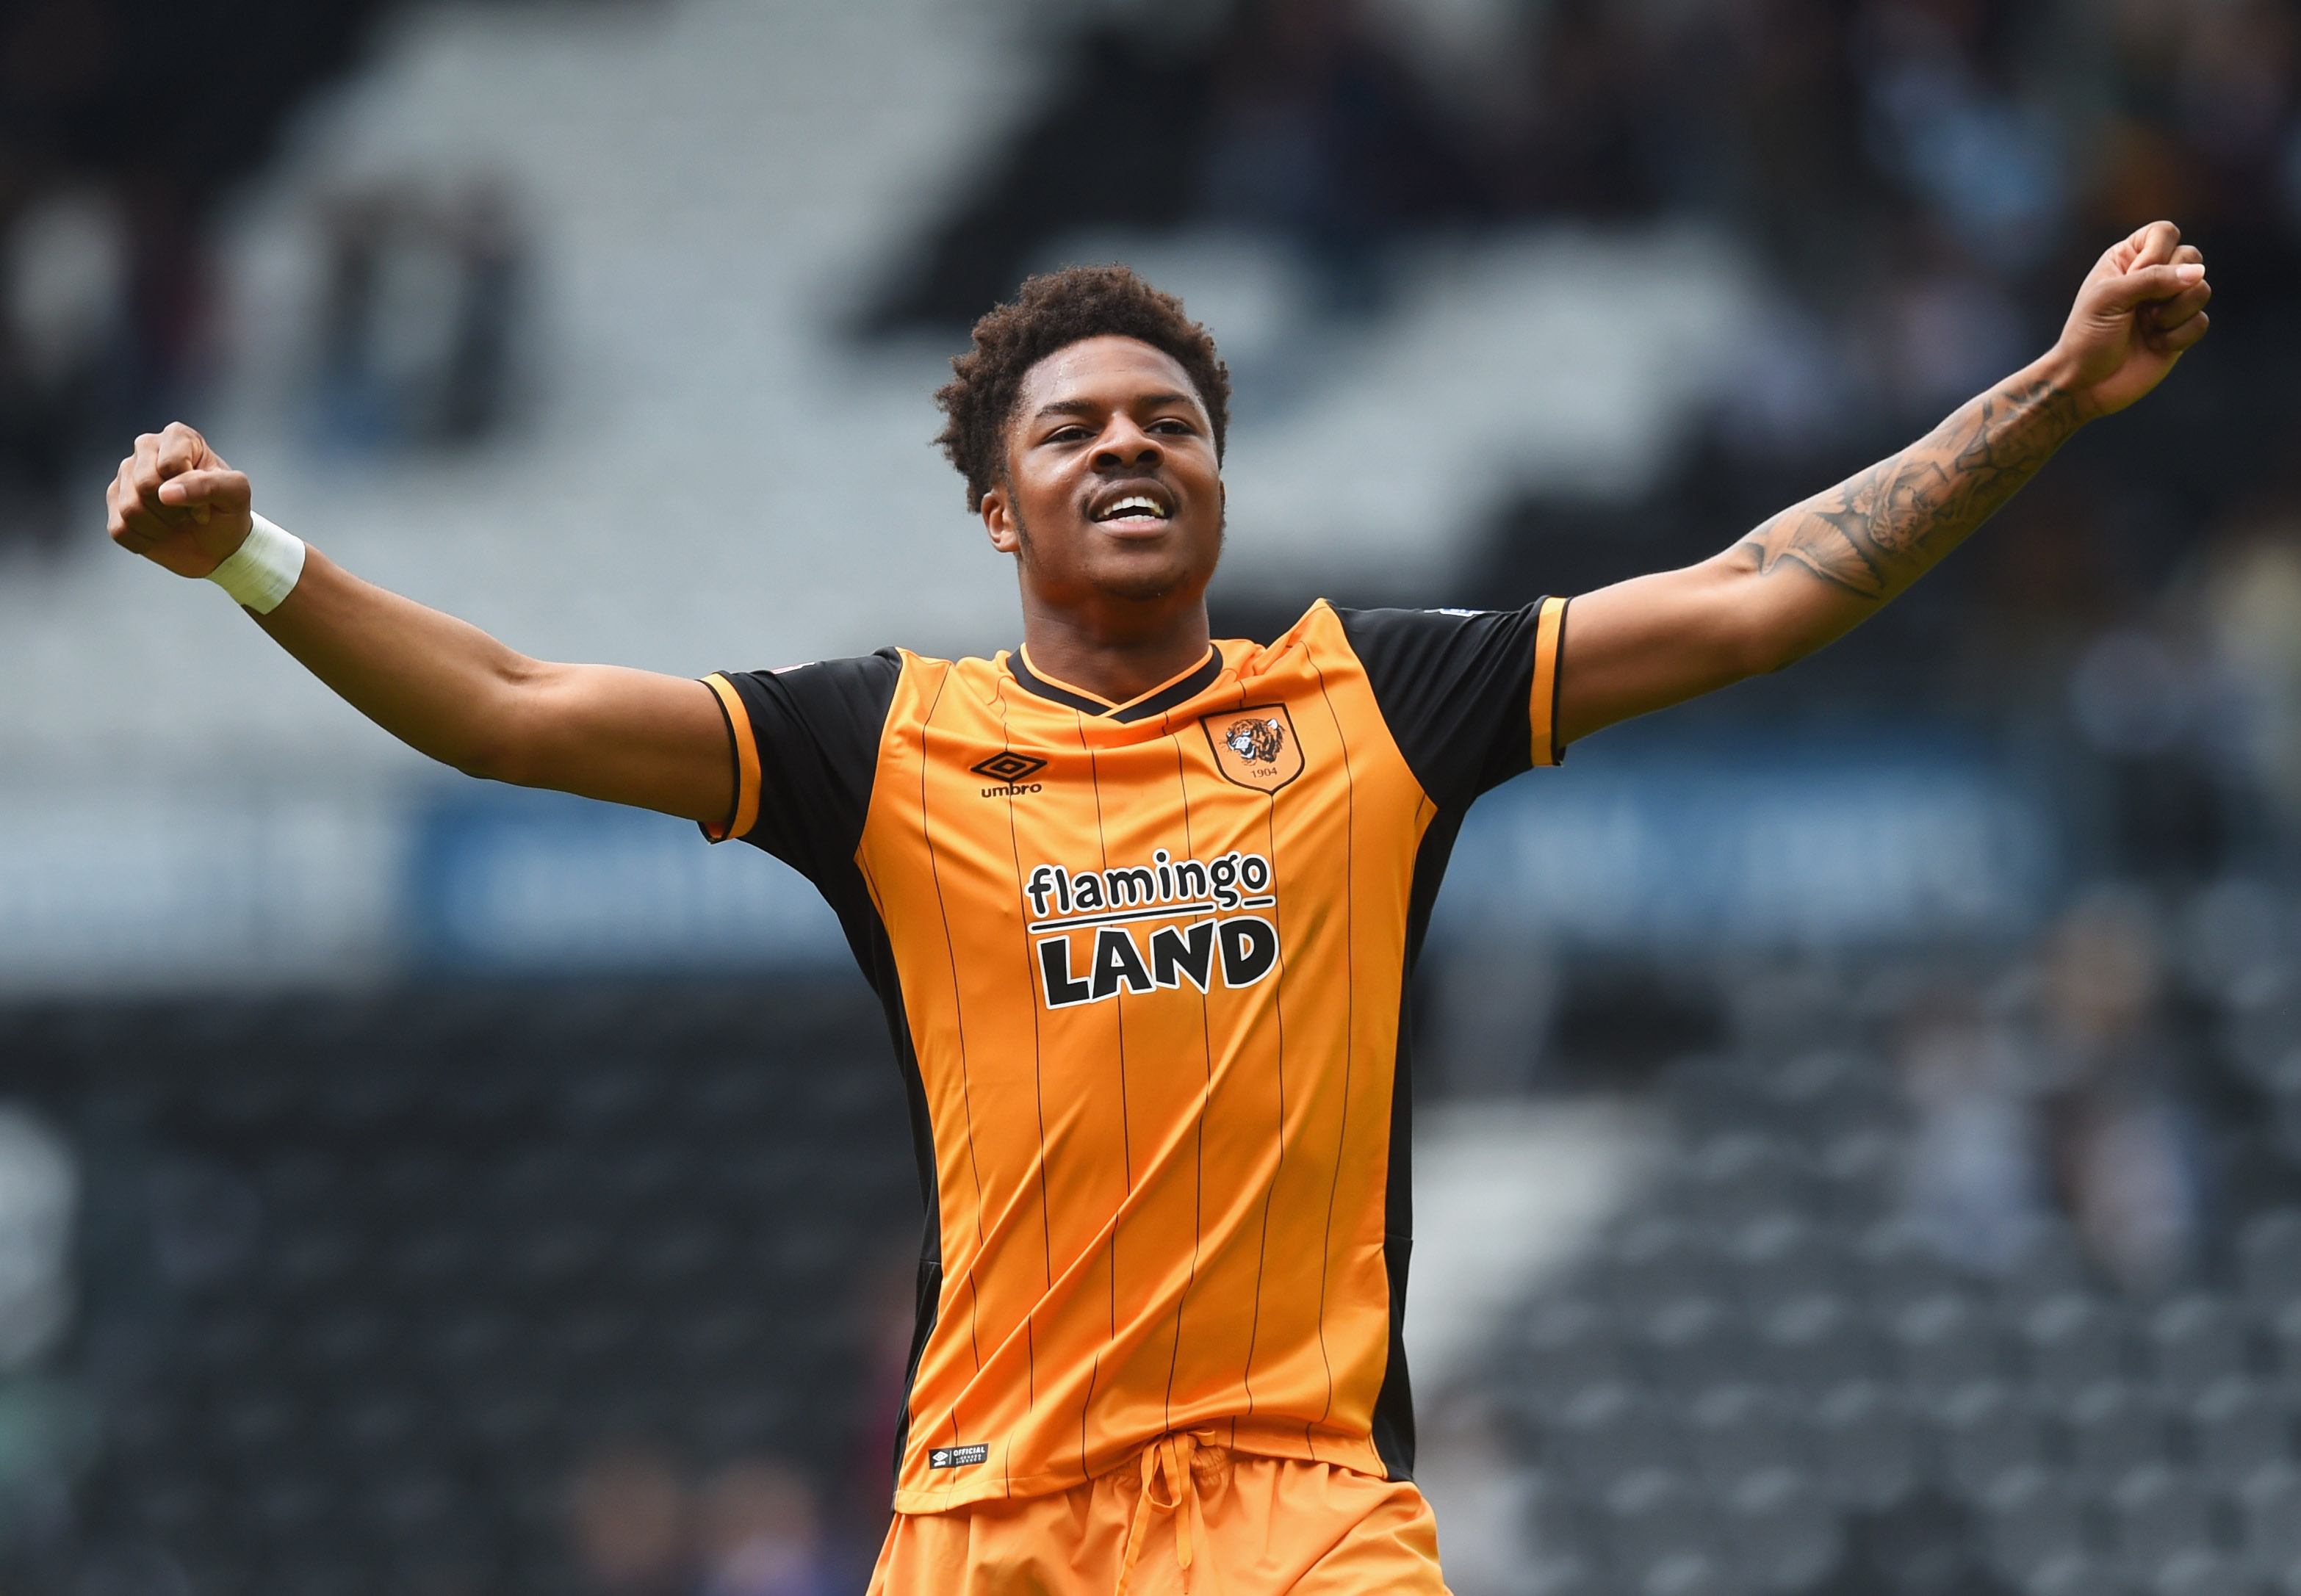 Arsenal: Chuba Akpom Could Reignite First Team Strikeforce